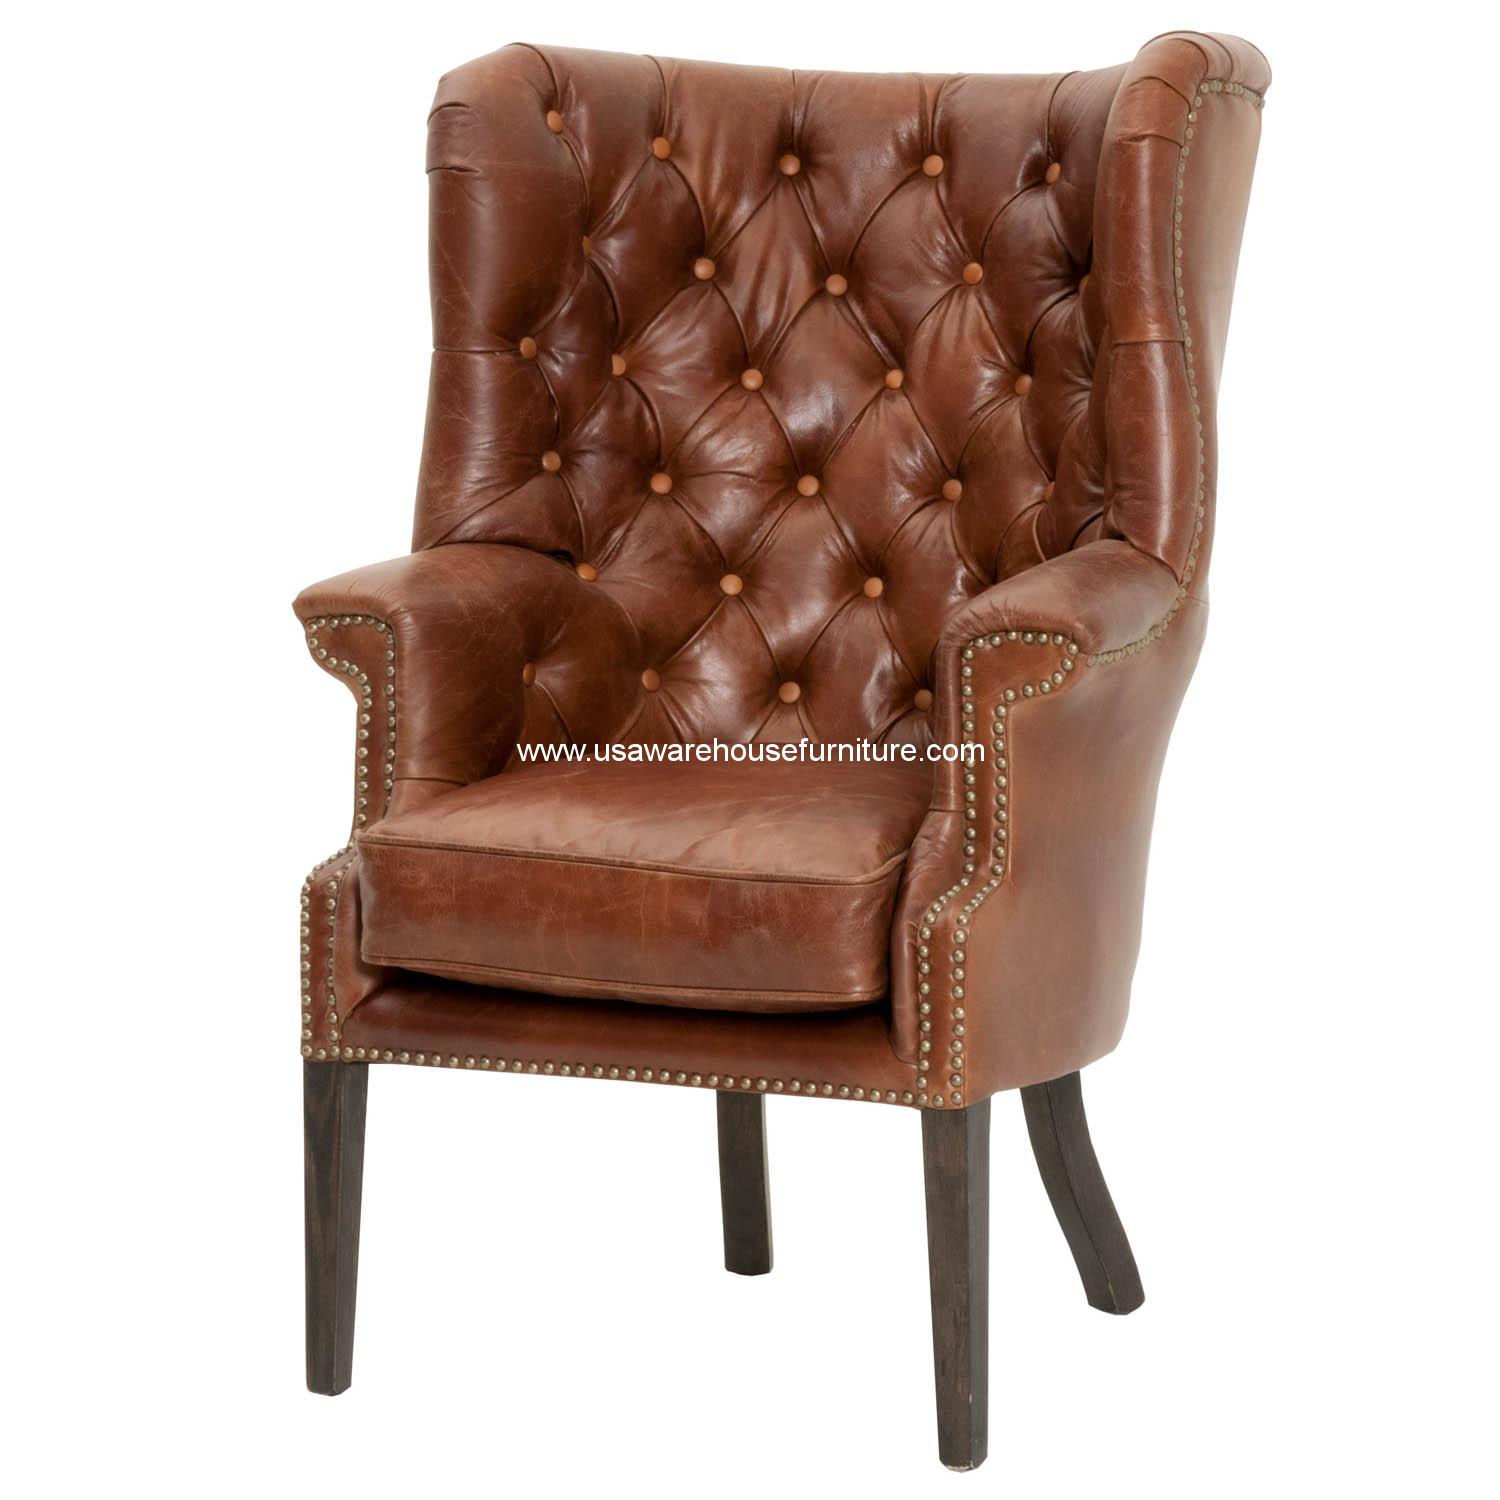 Patina Hughes Chestnut Antique Tufted Leather Club Chair ...